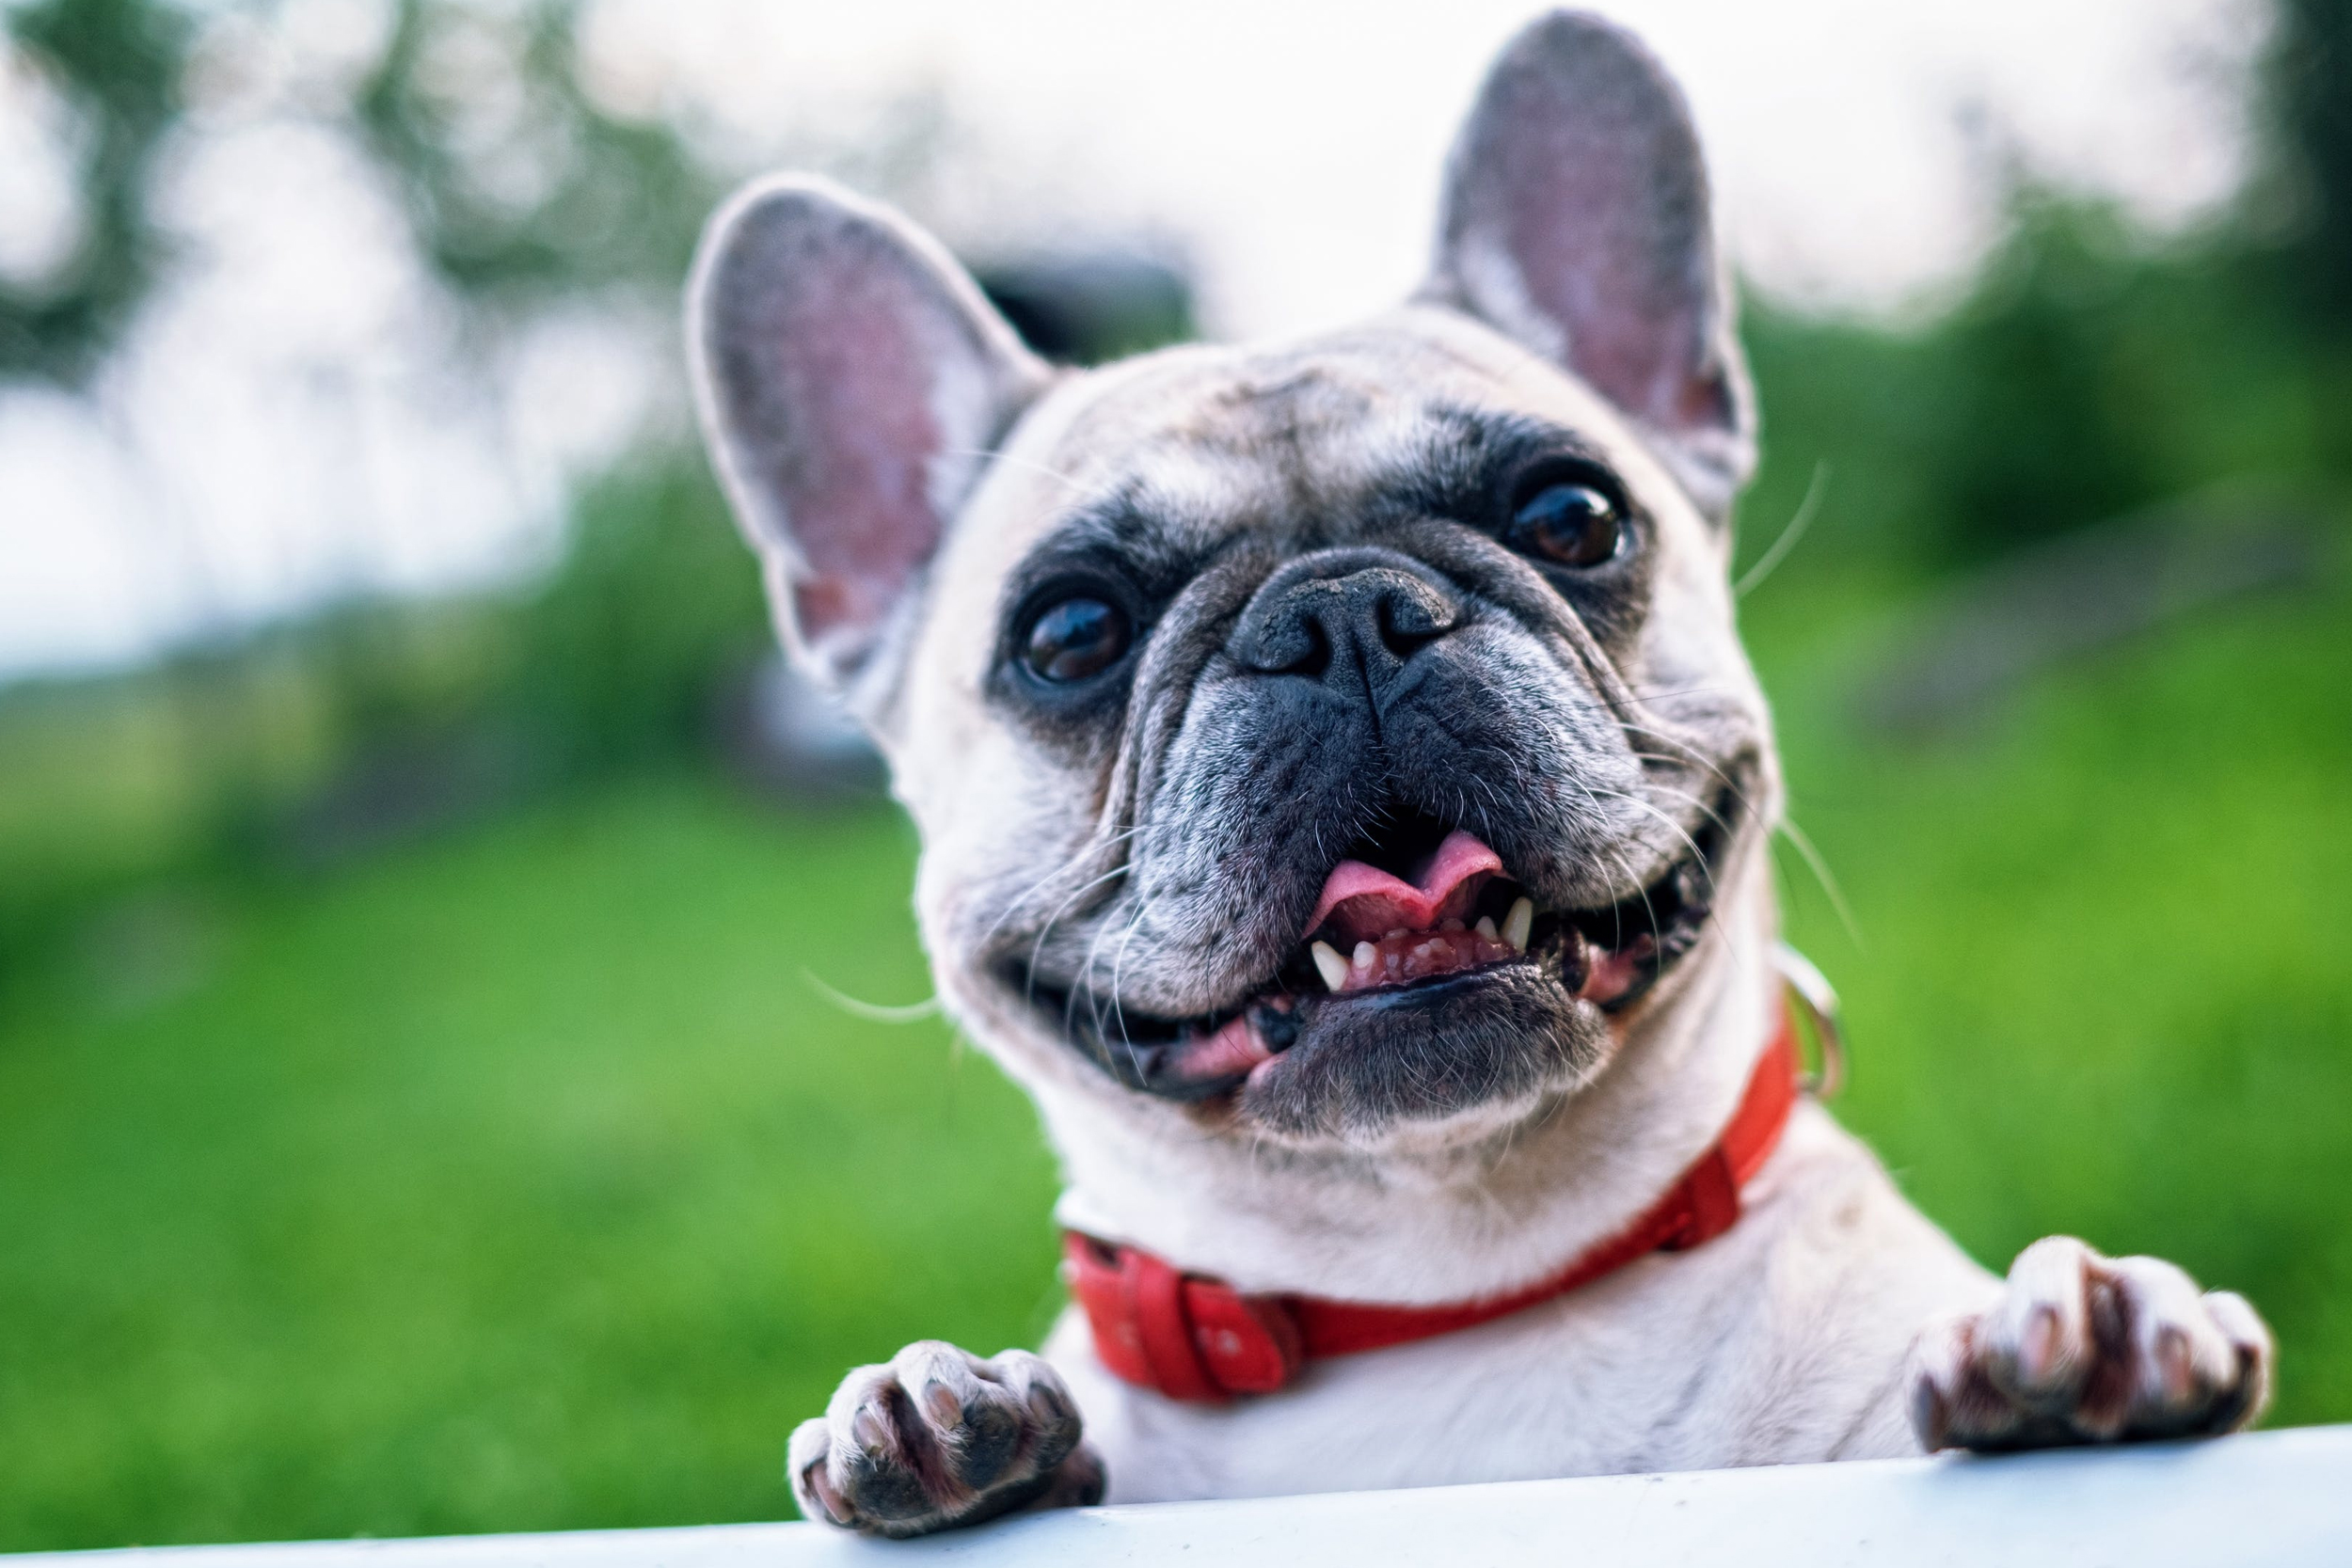 Pets R.I.P – Benefits of Having a Dignified Cremation for Your Pet